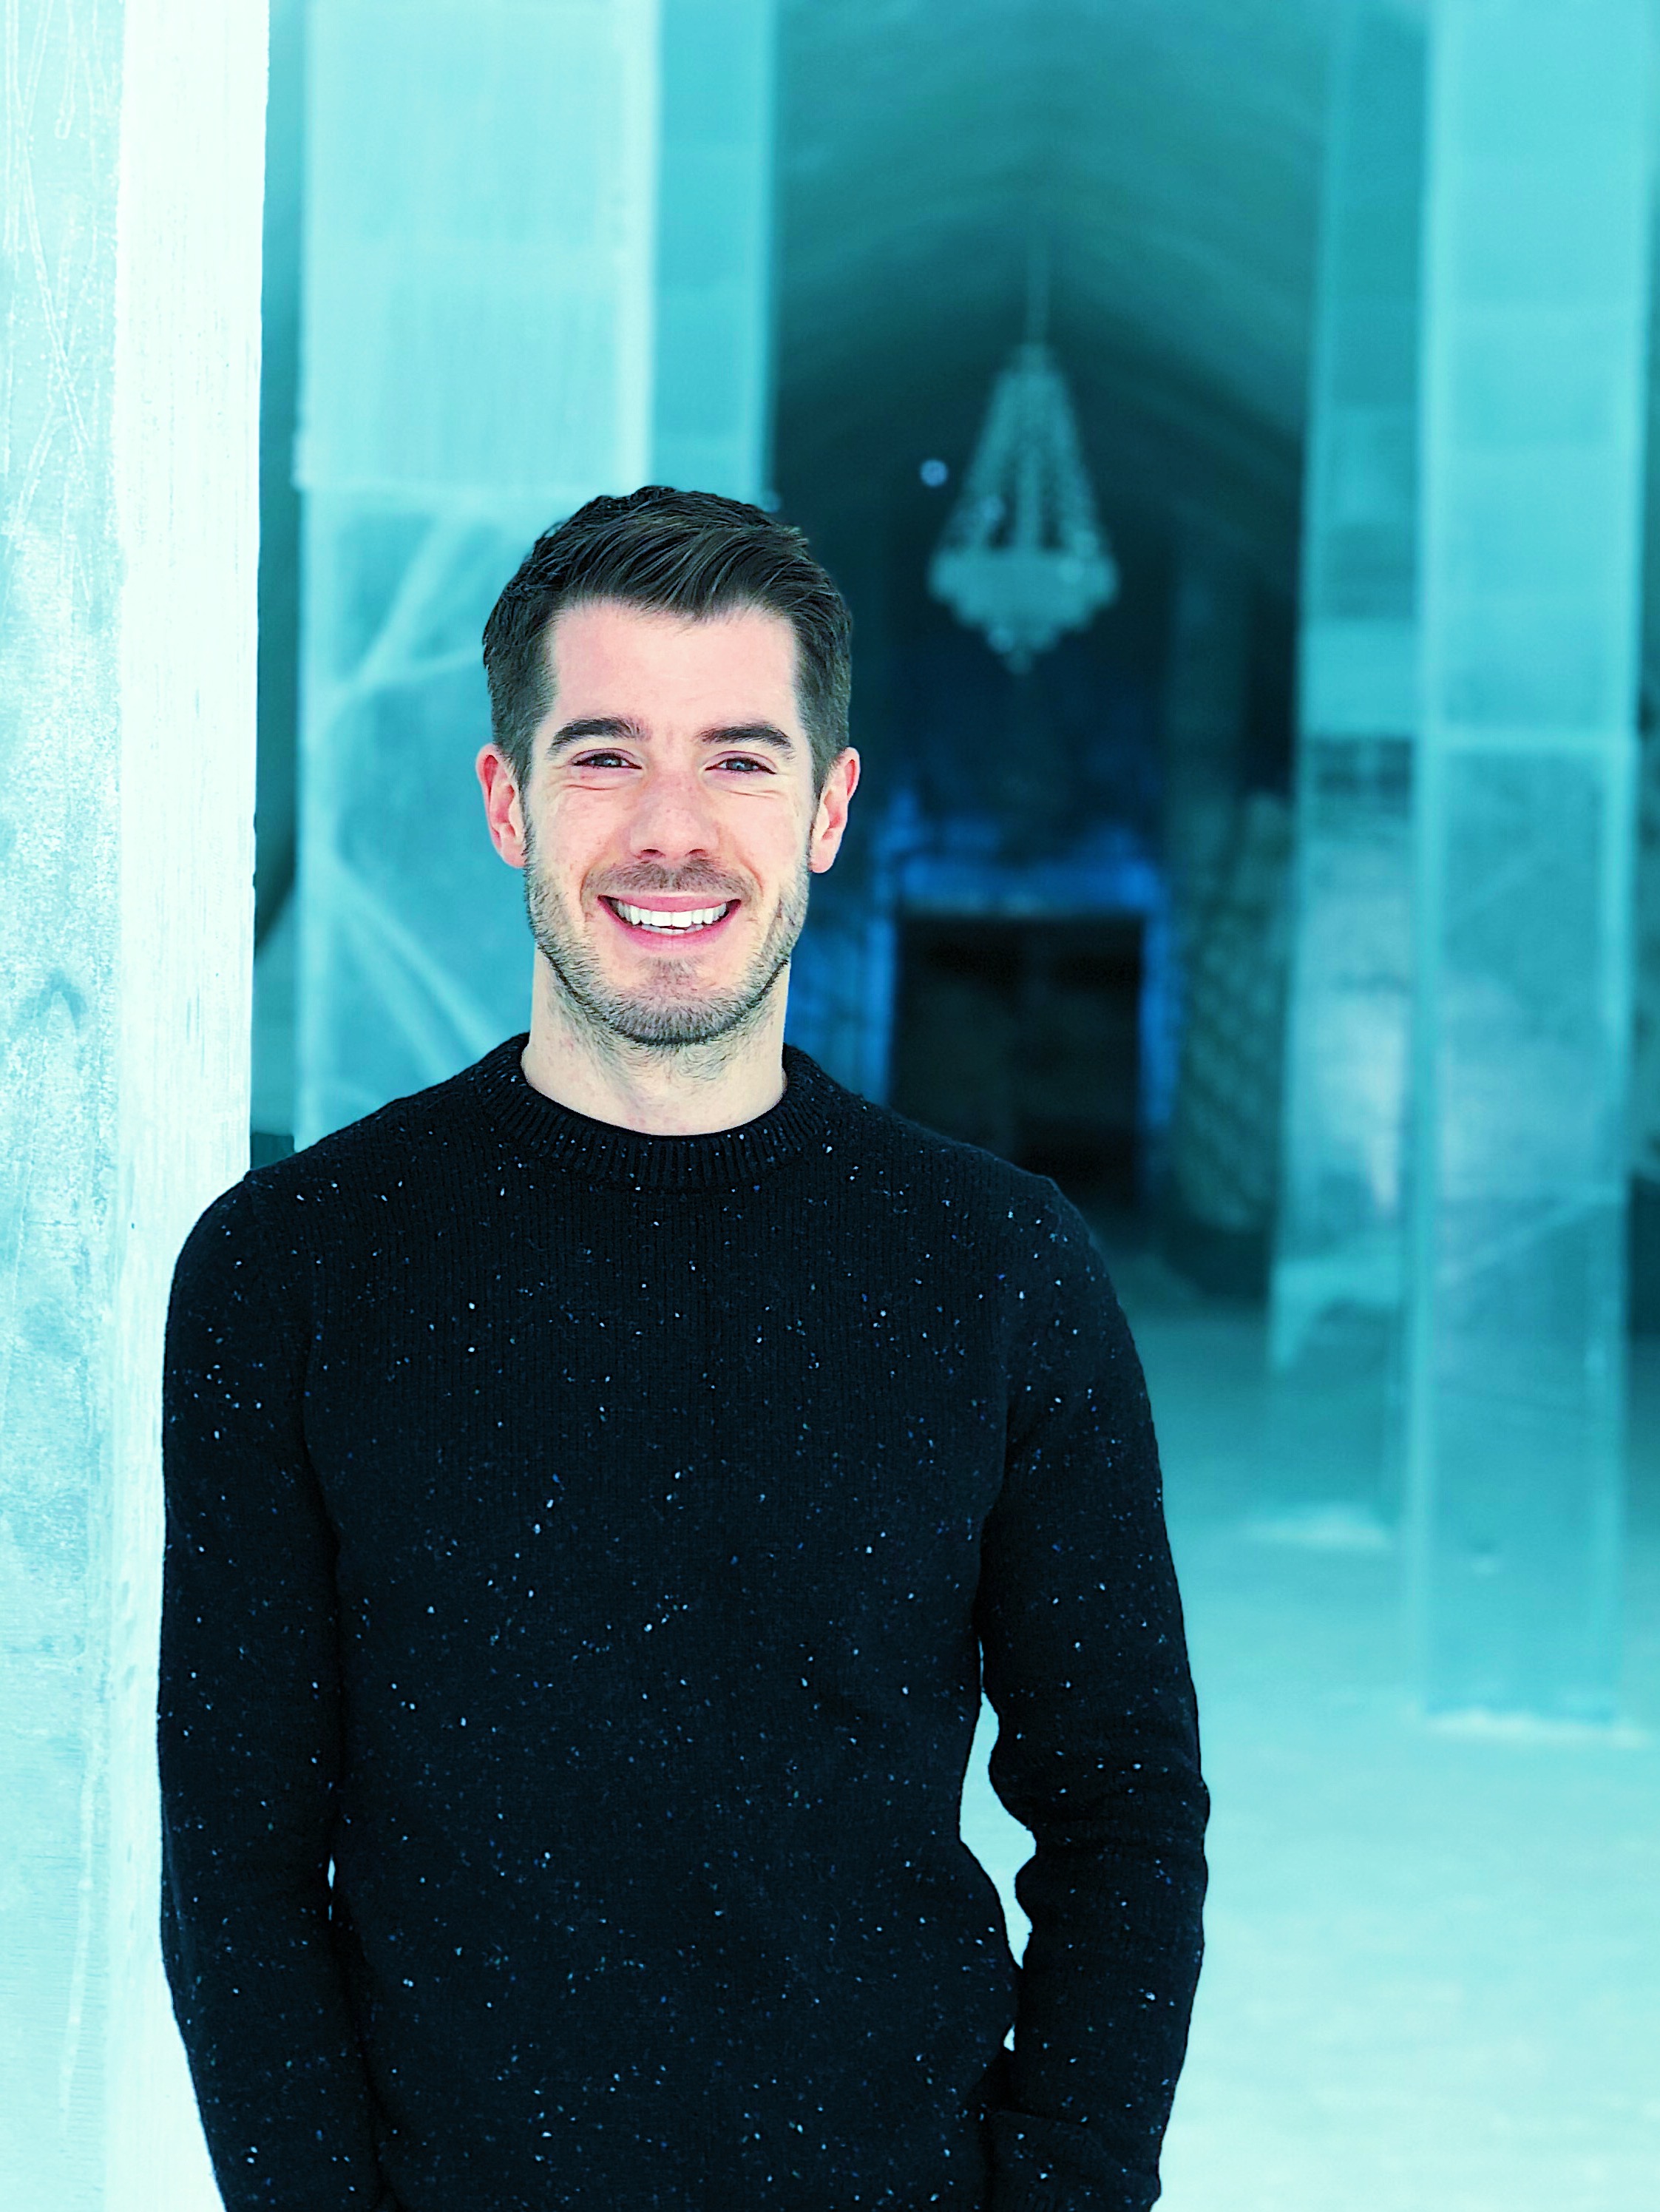 John Gregory-Smith at The Ice Hotel Sweden